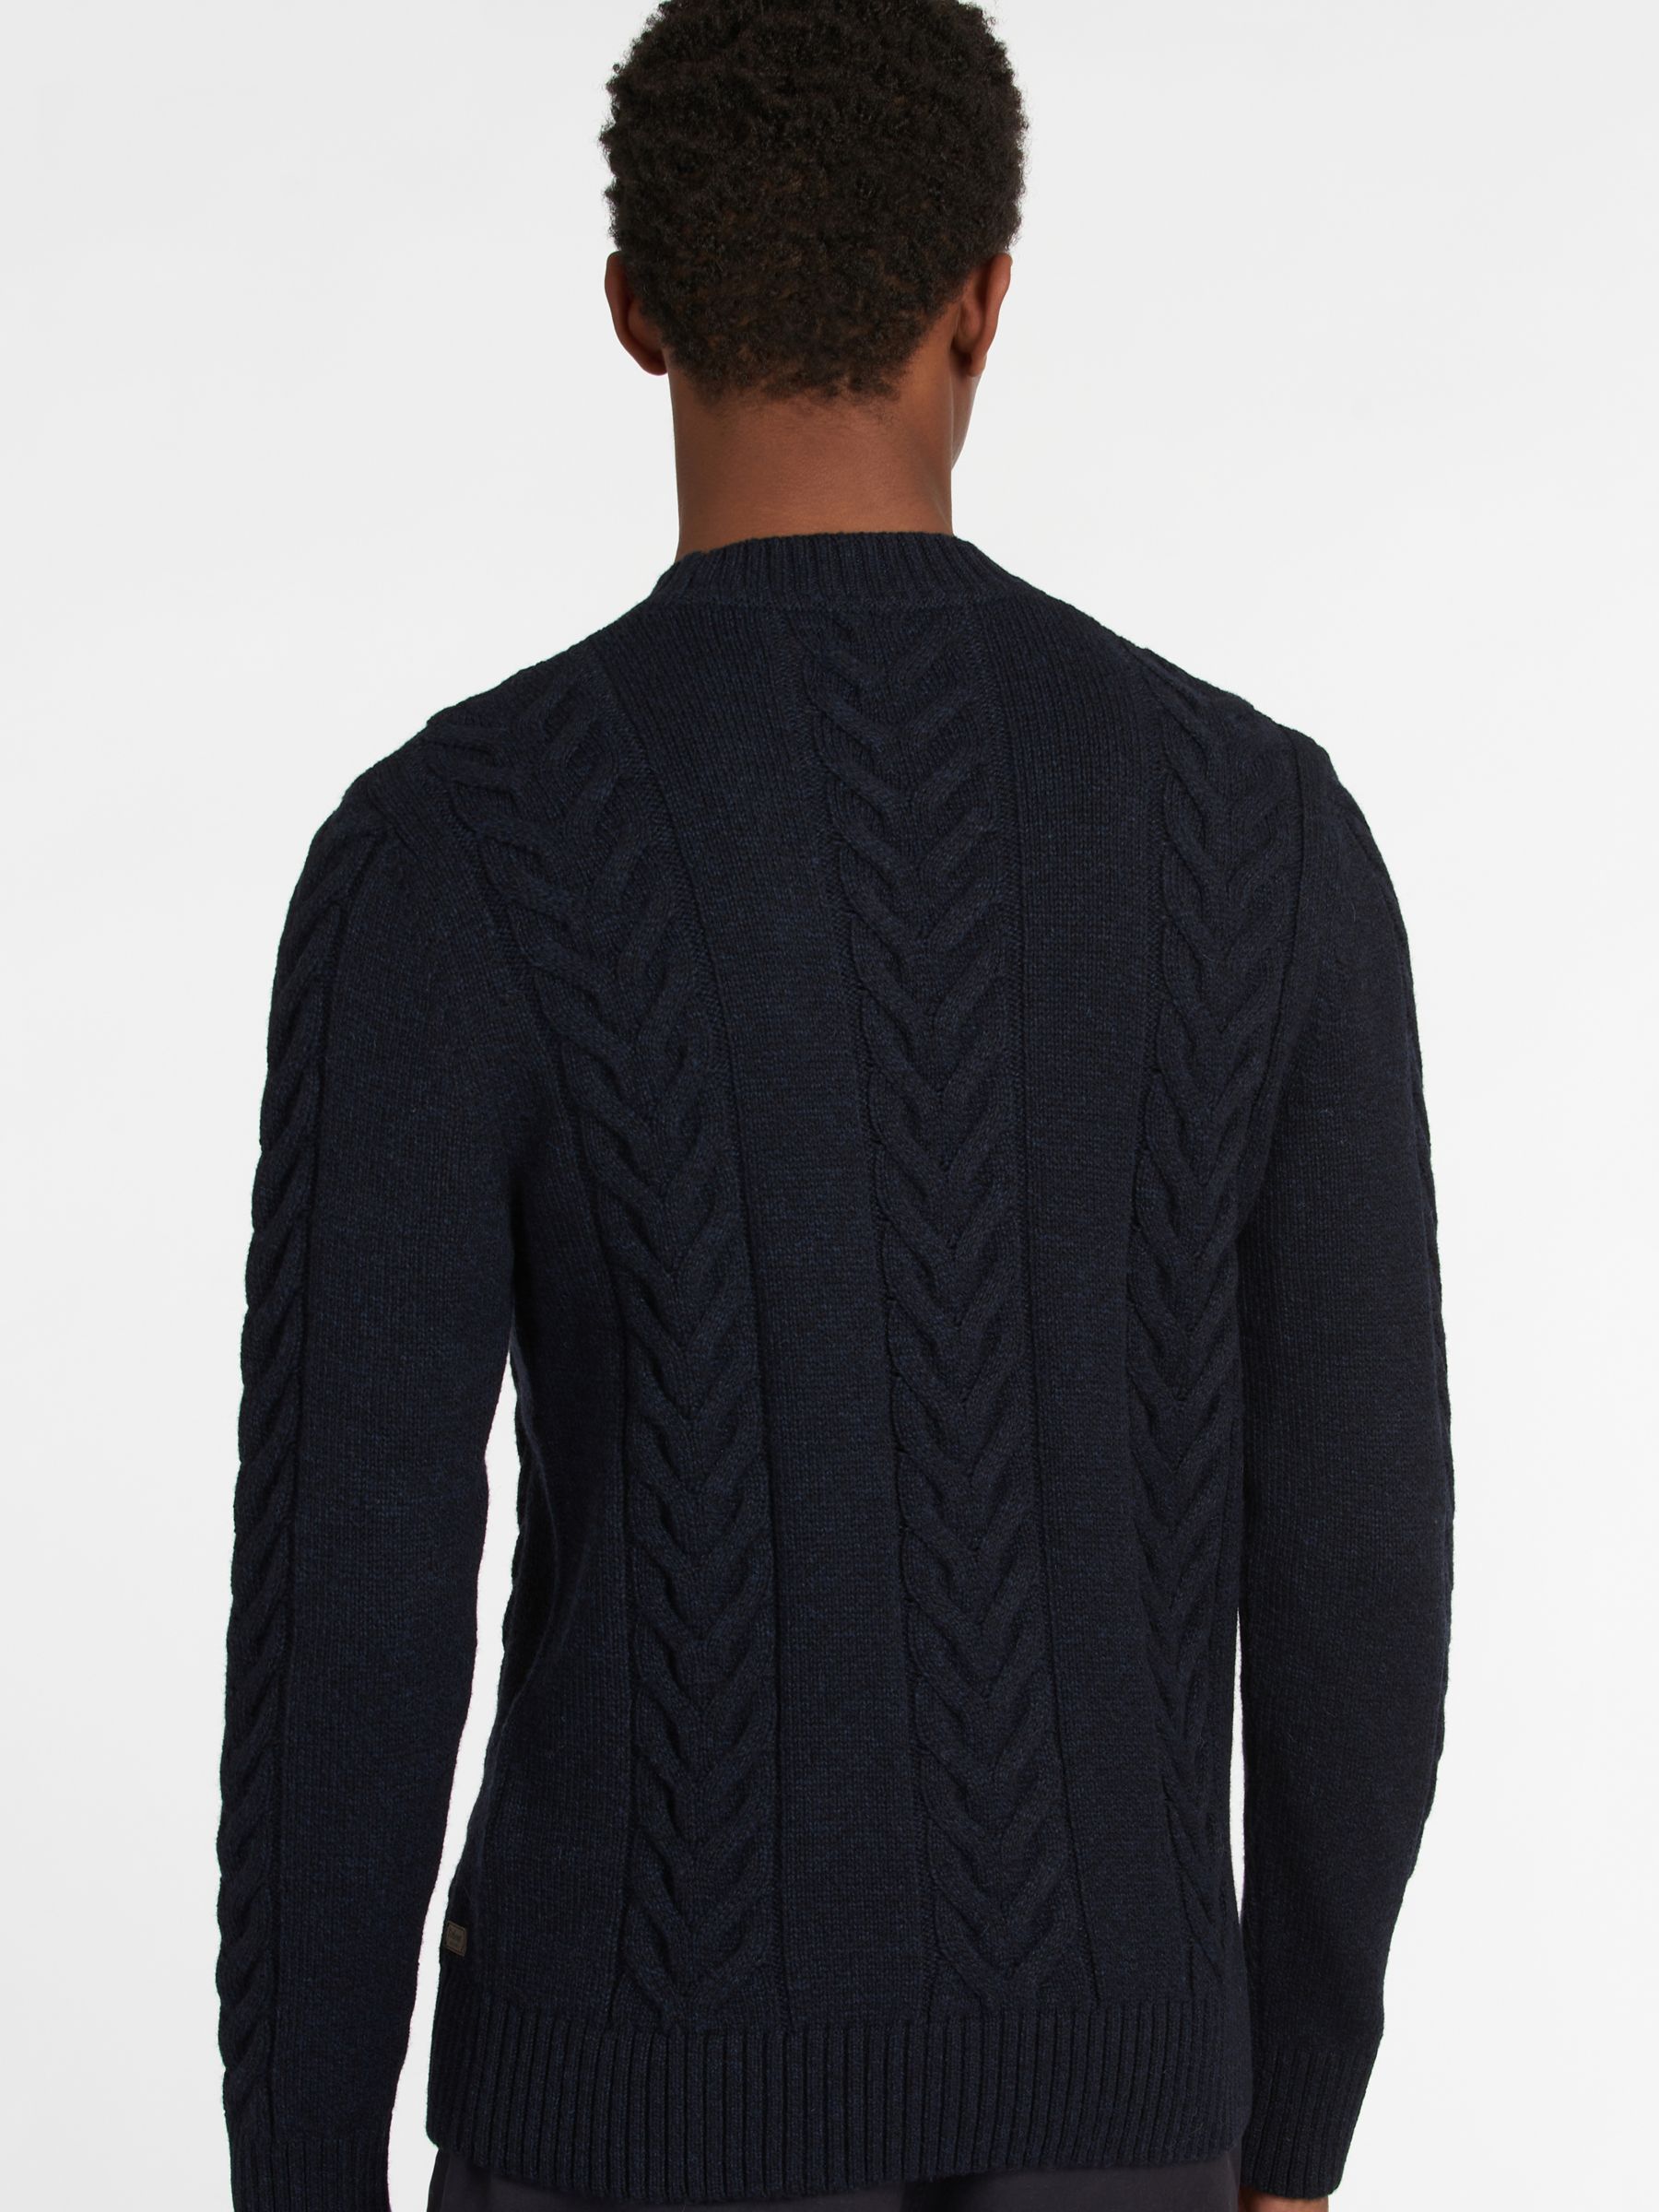 Barbour Lifestyle Cable Knit Jumper, Navy Marl at John Lewis & Partners